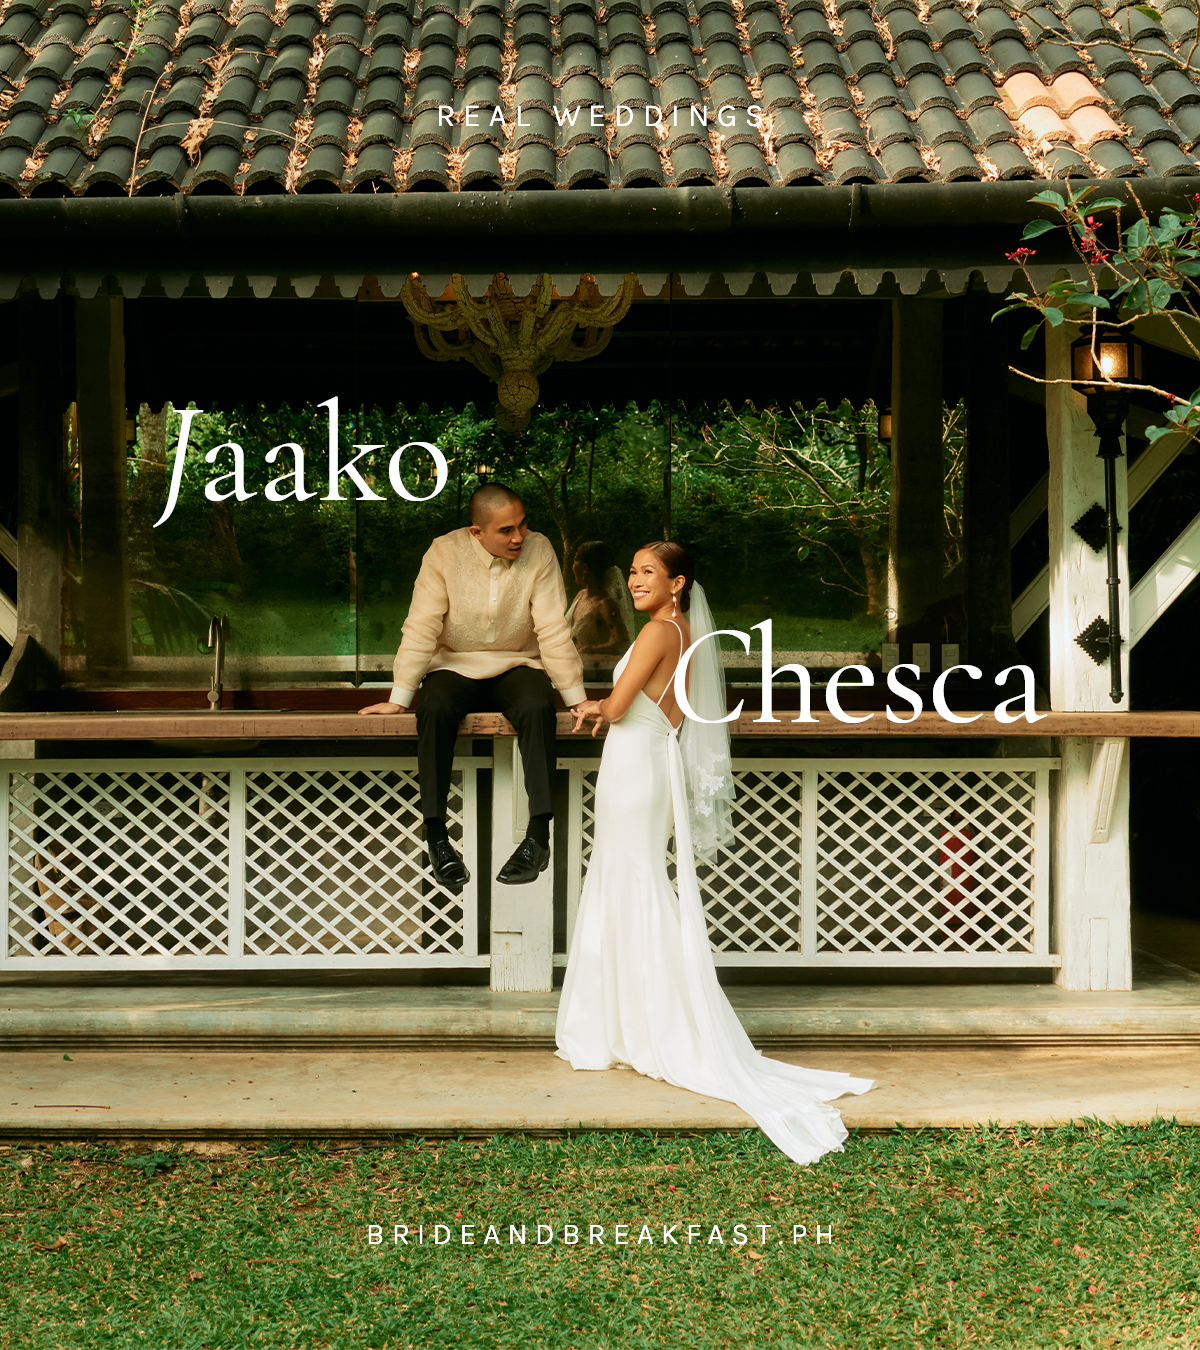 Jaako and Chesca